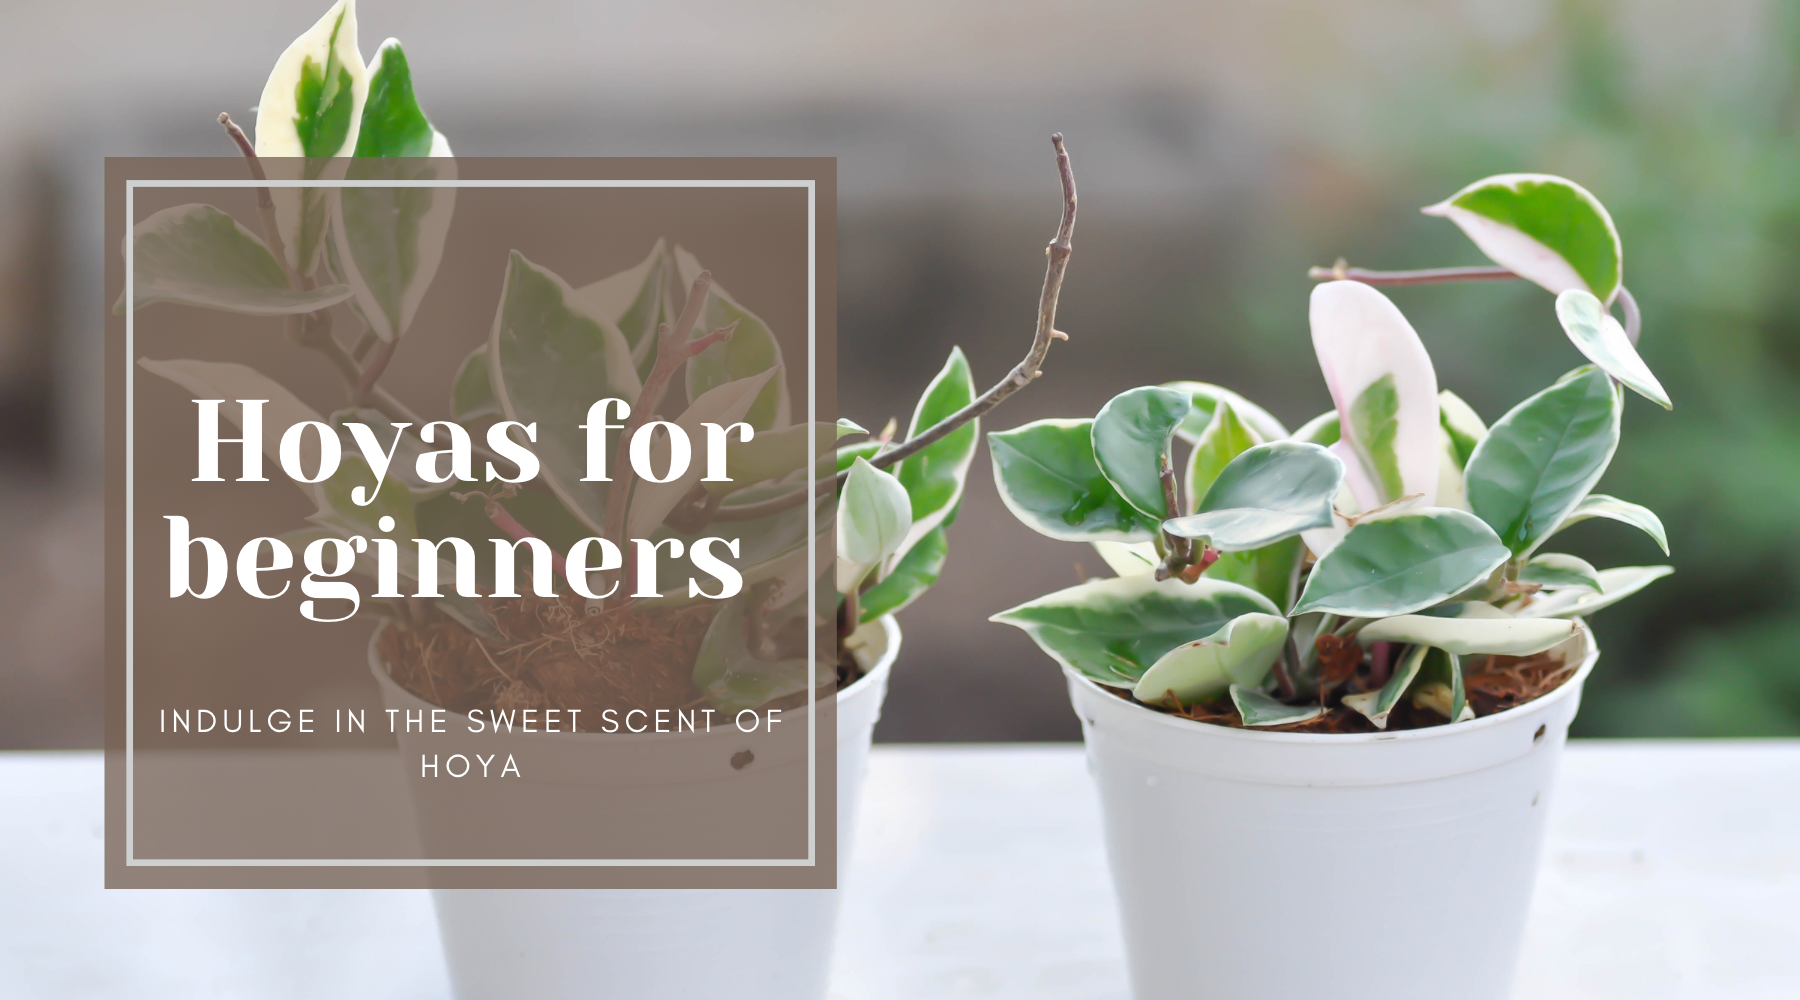 An introduction to Hoyas for beginners